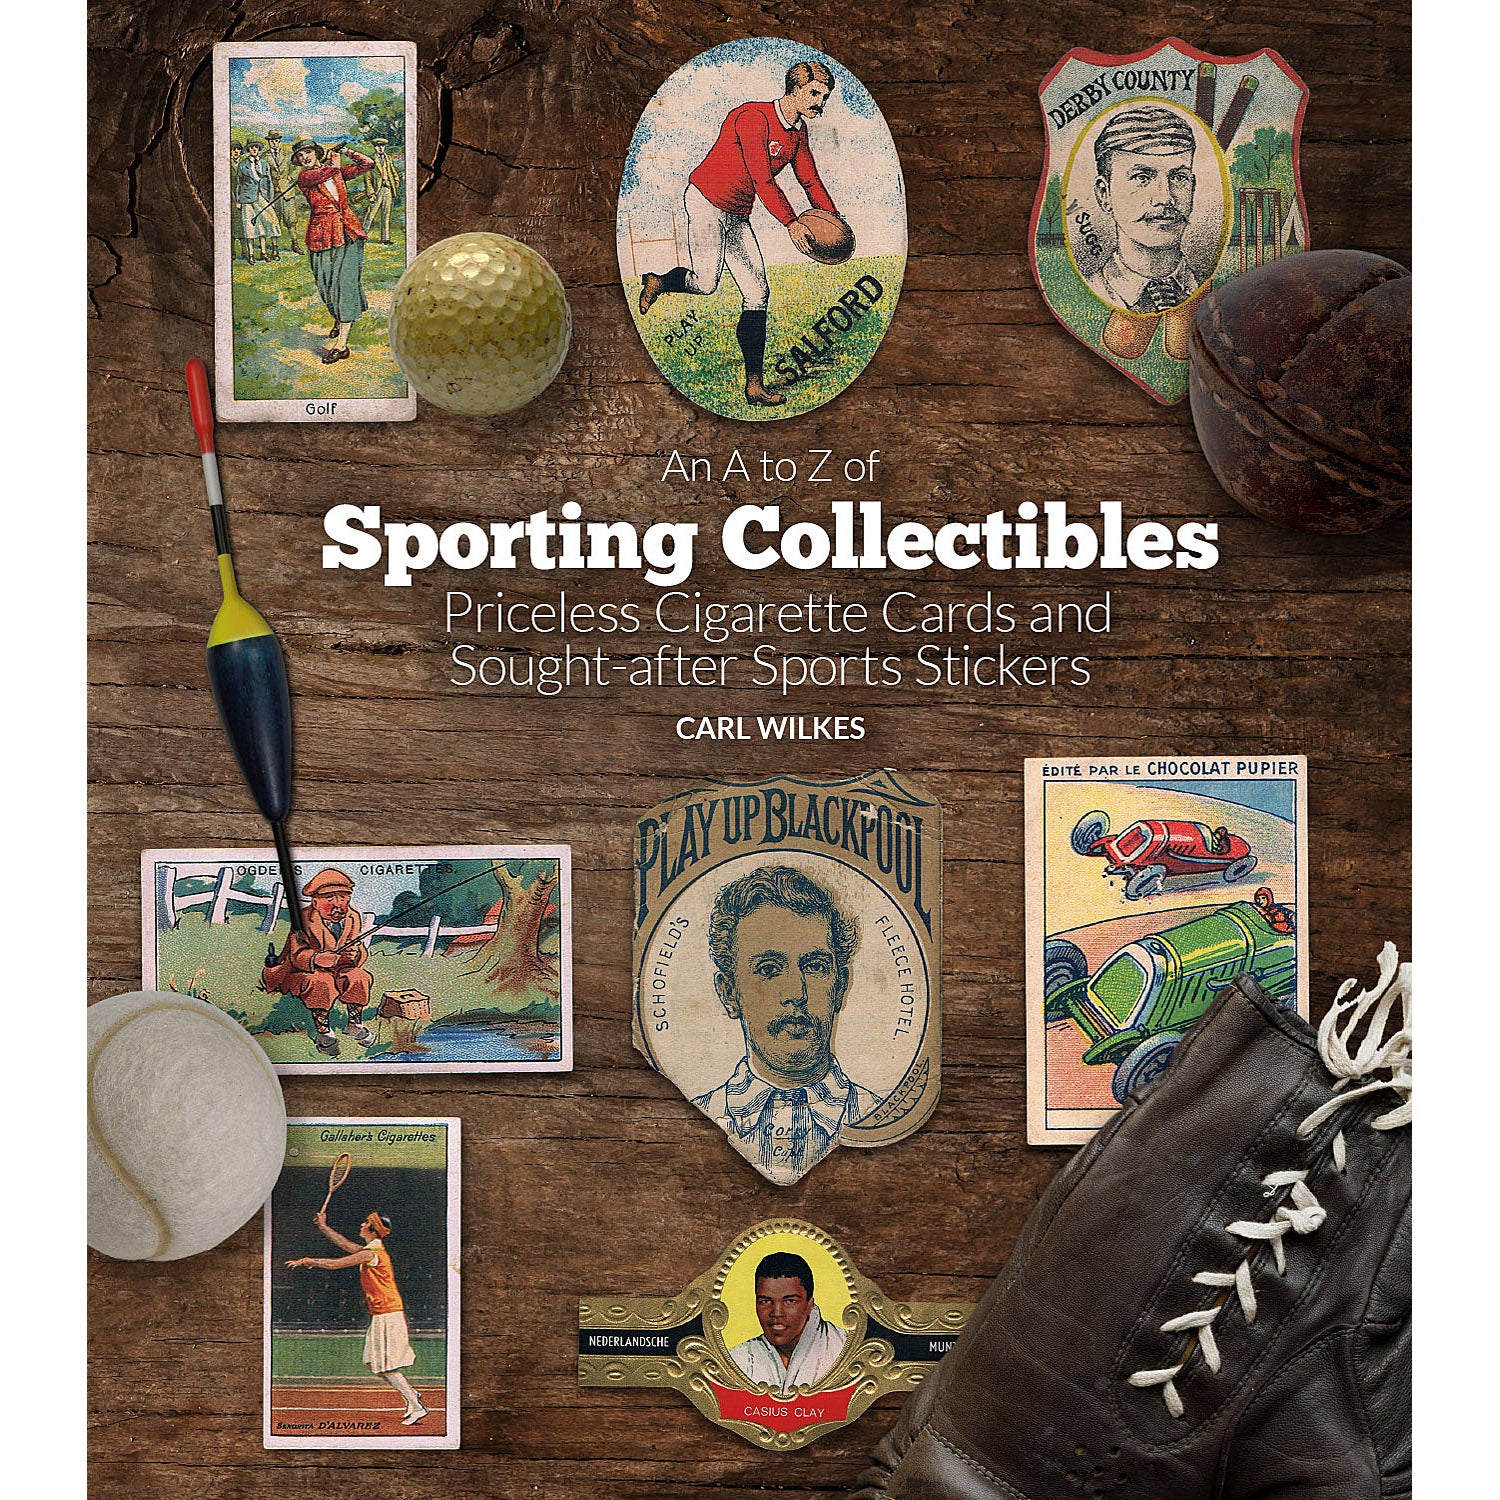 An A-Z of Sporting Collectibles – Priceless Cigarette Cards and Sought-after Sports Stickers